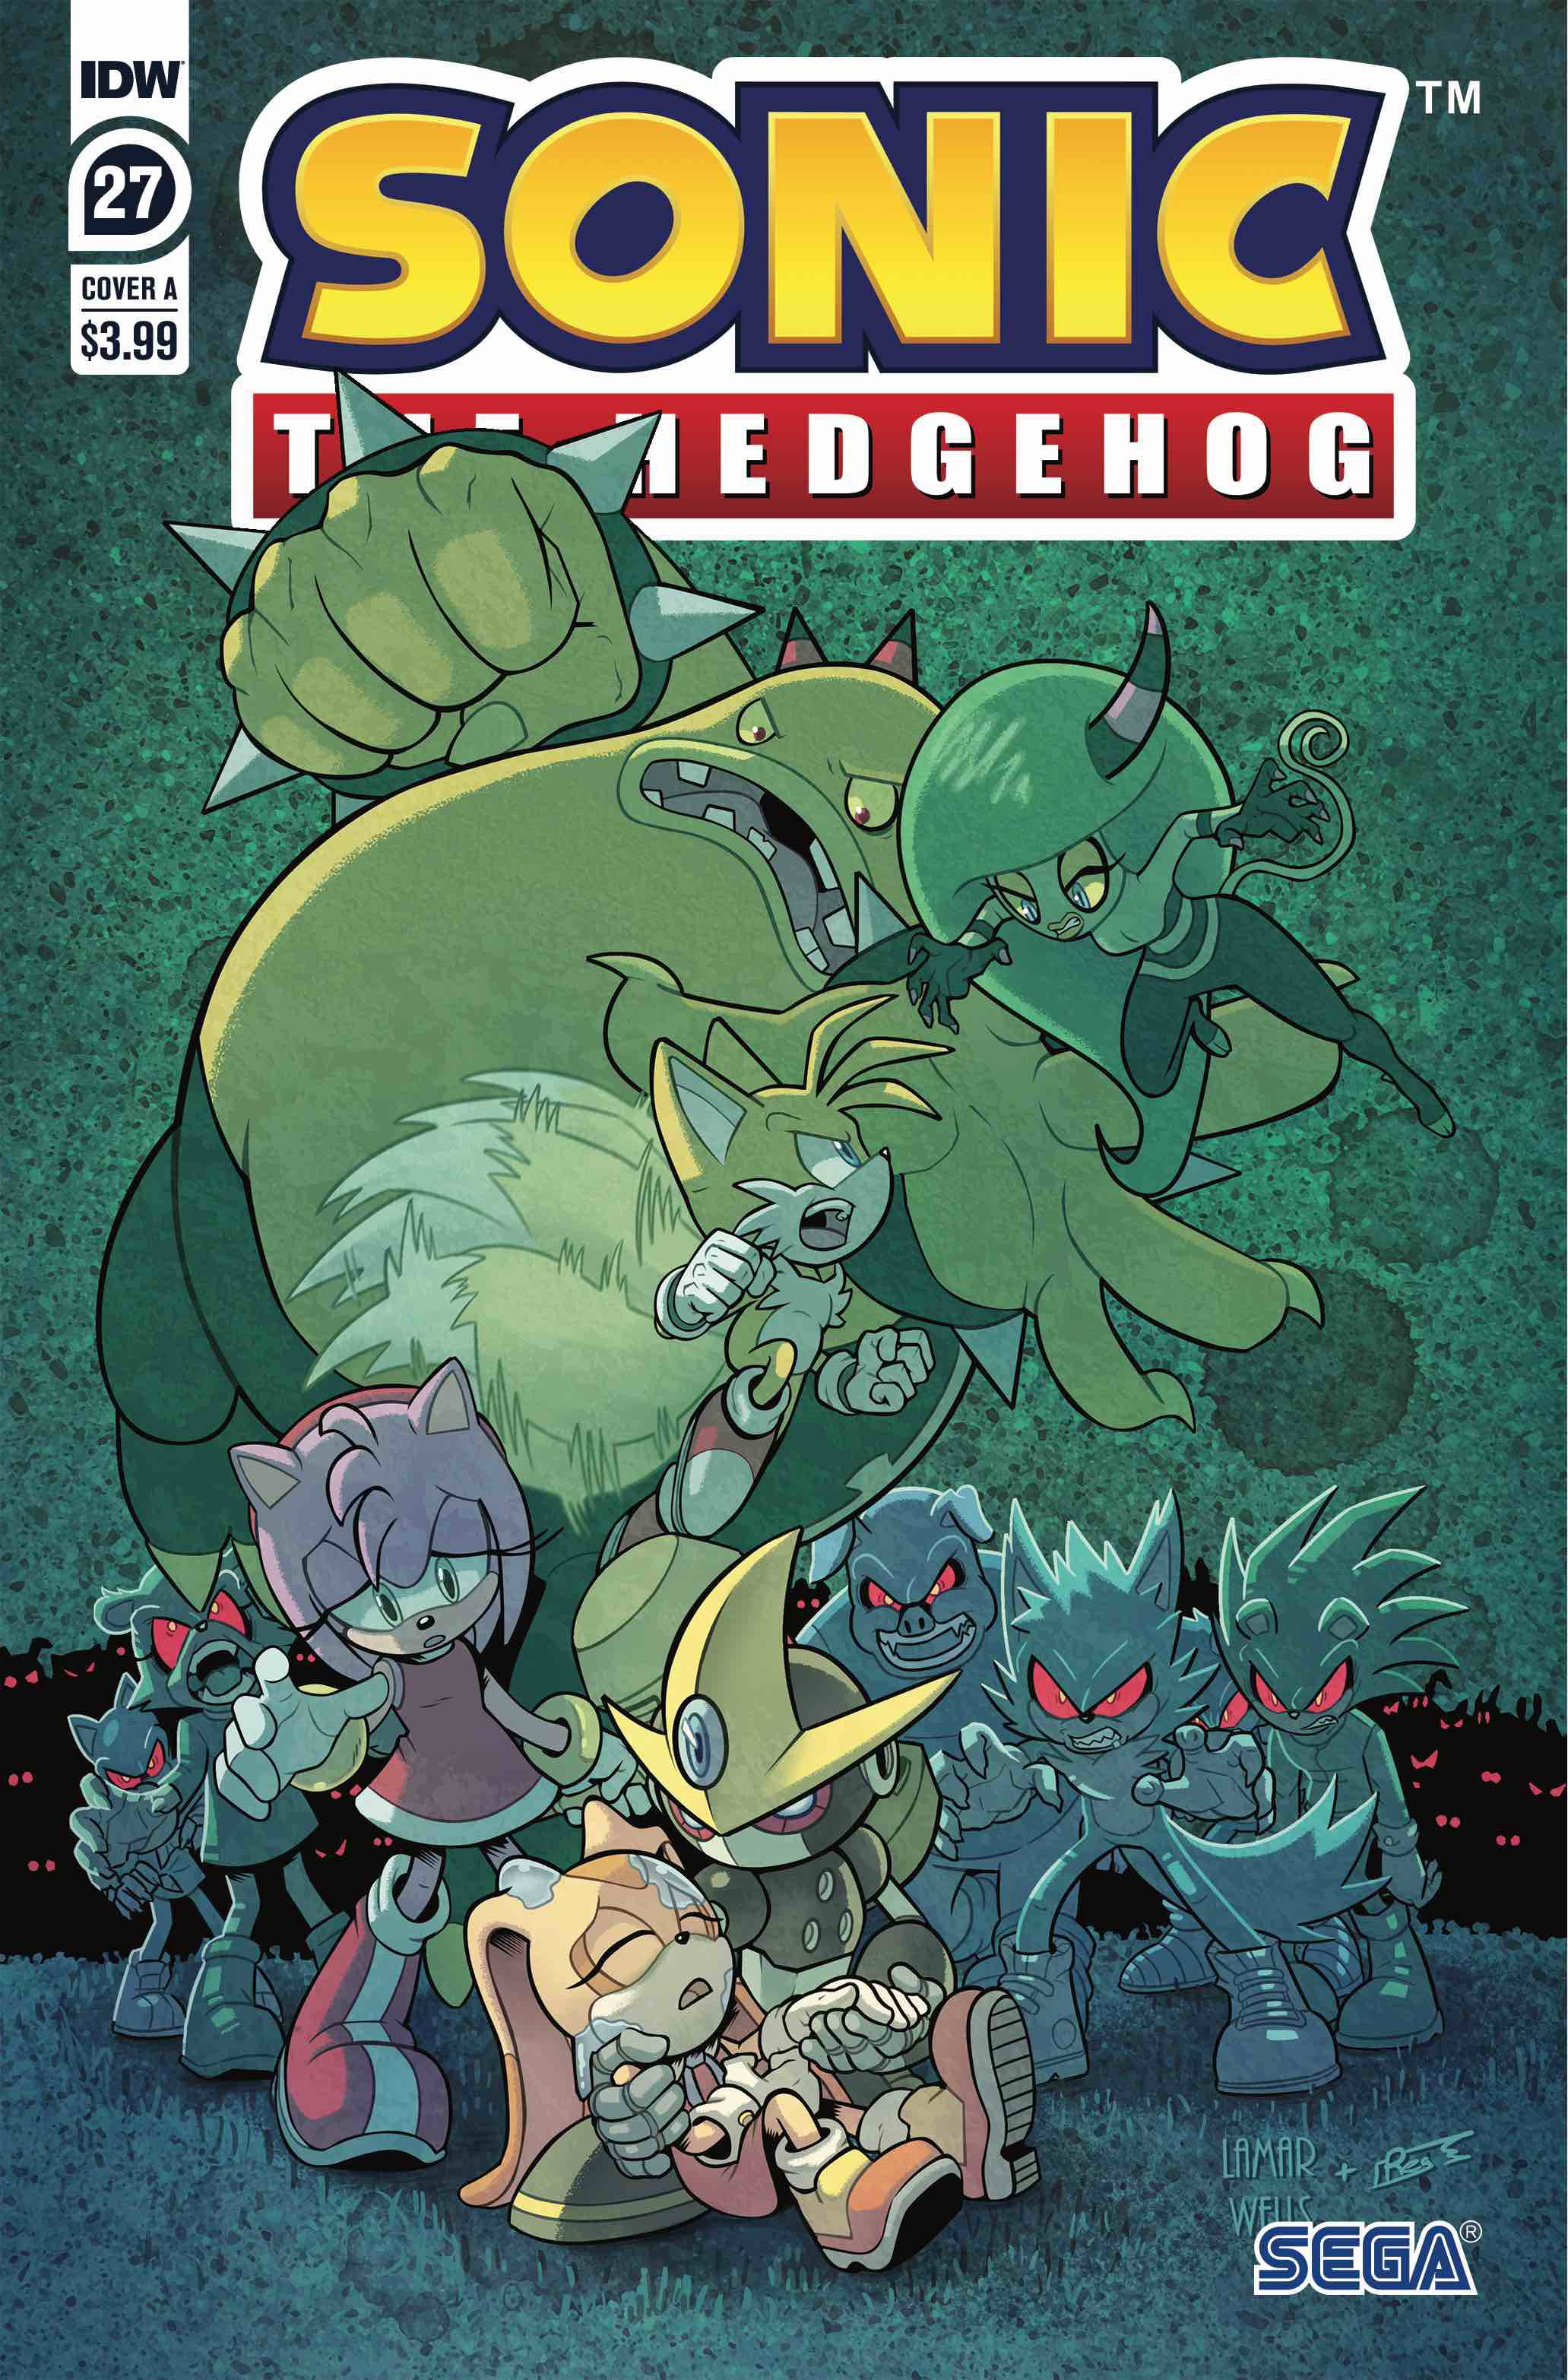 Sonic the Hedgehog #27 Cover A Wells & Graham